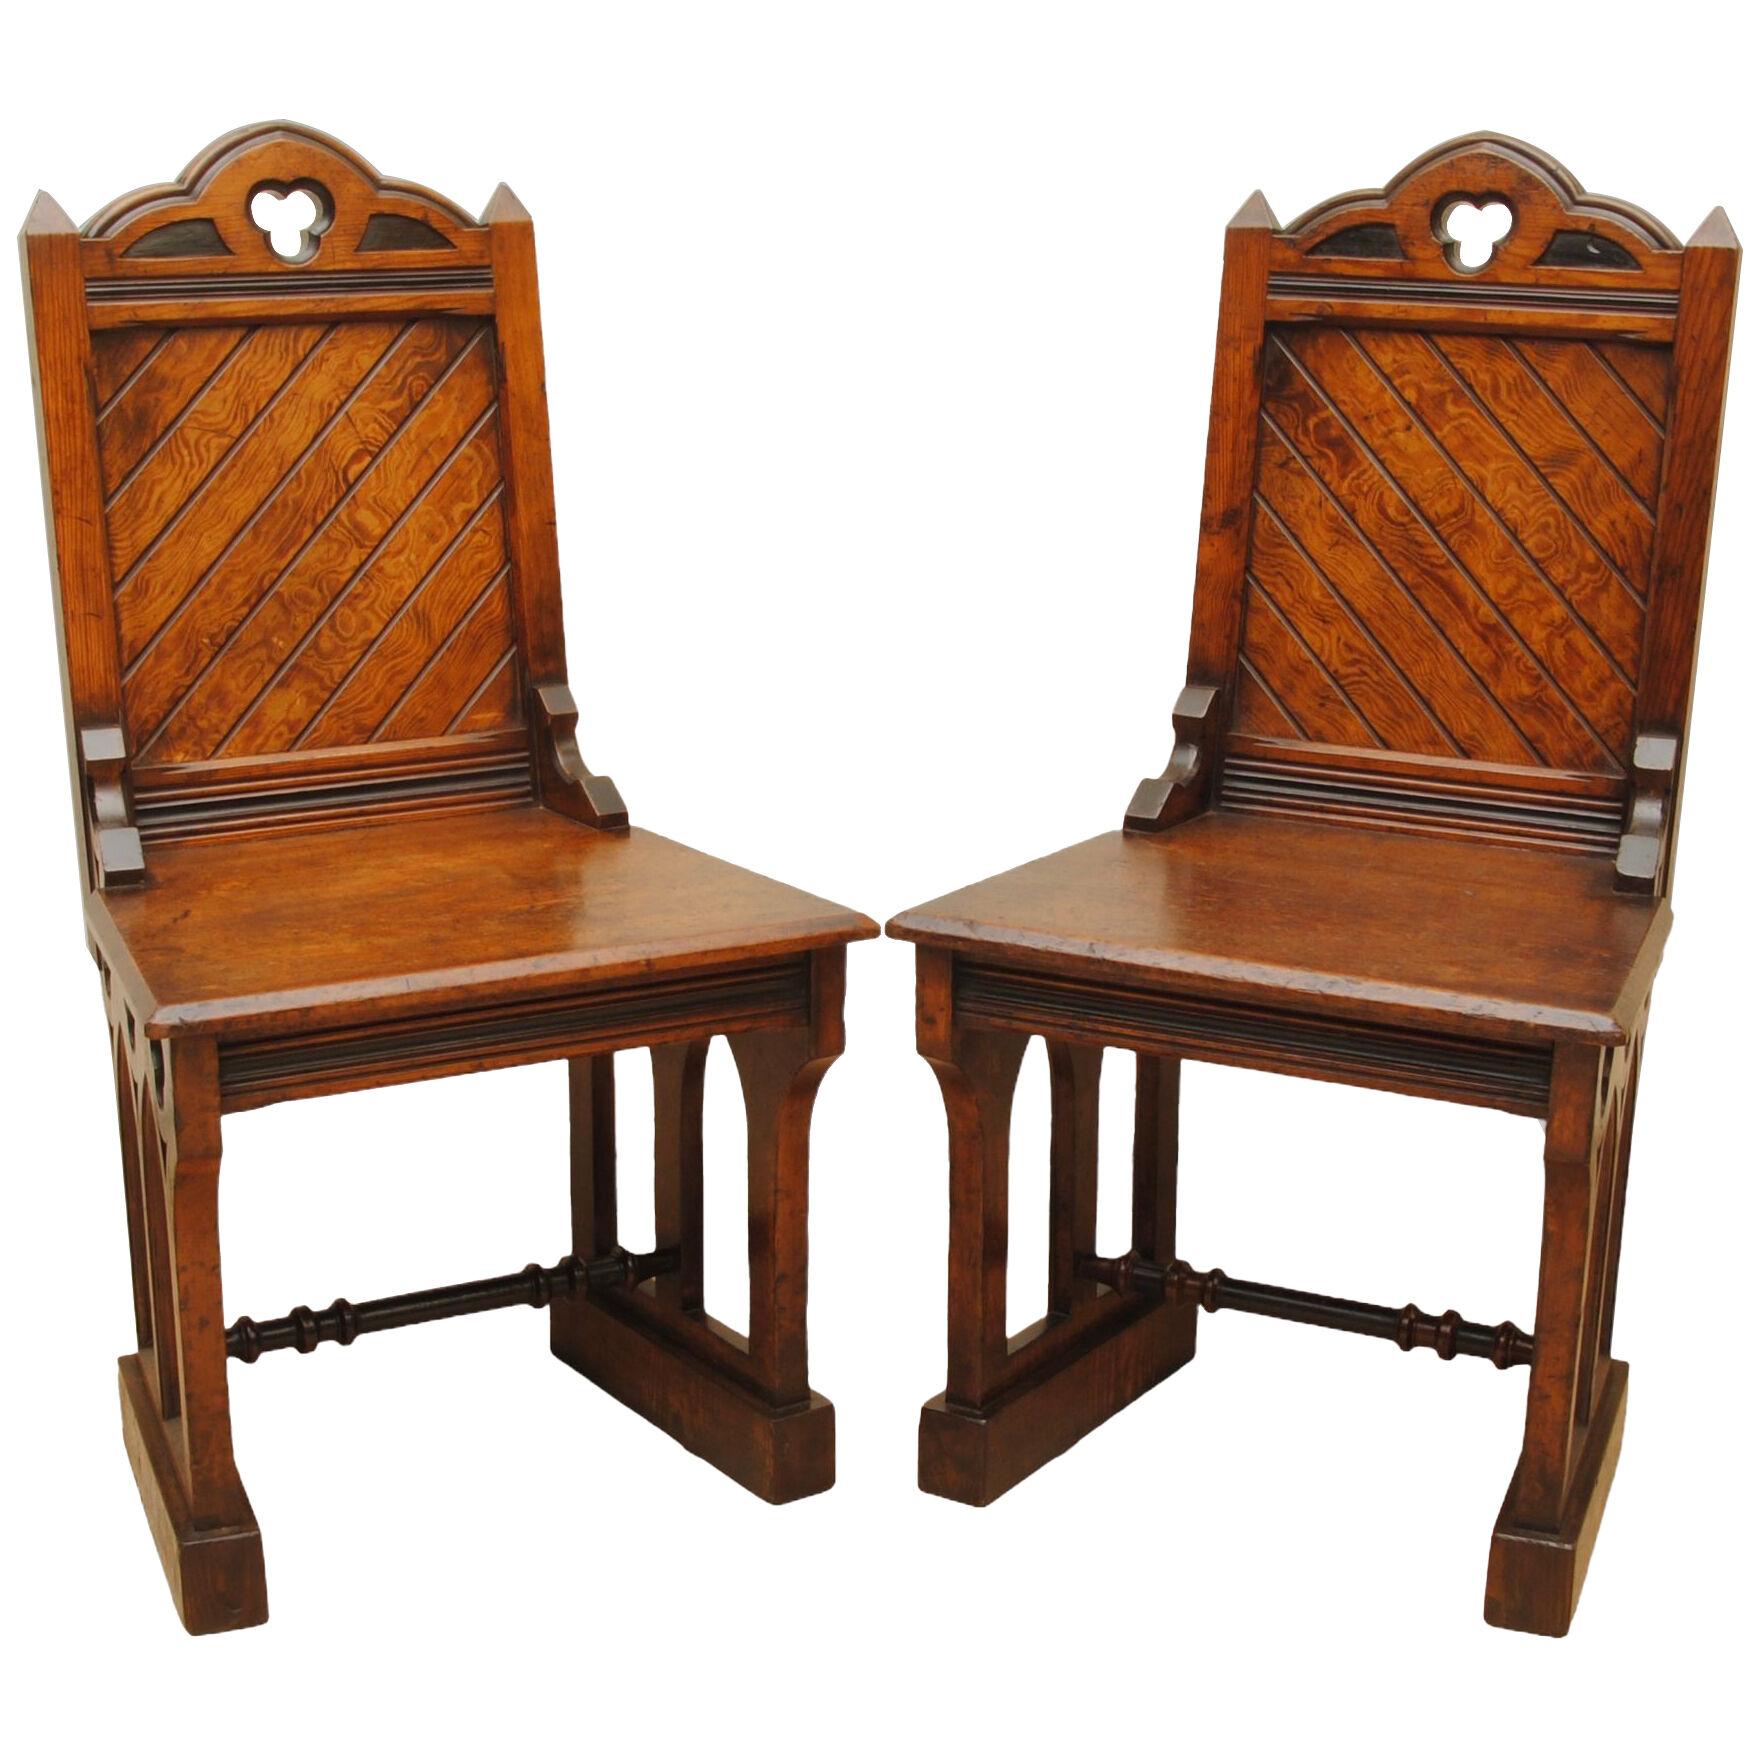 A PAIR OF 19TH CENTURY GOTHIC DESIGN PITCH PINE HALL CHAIRS